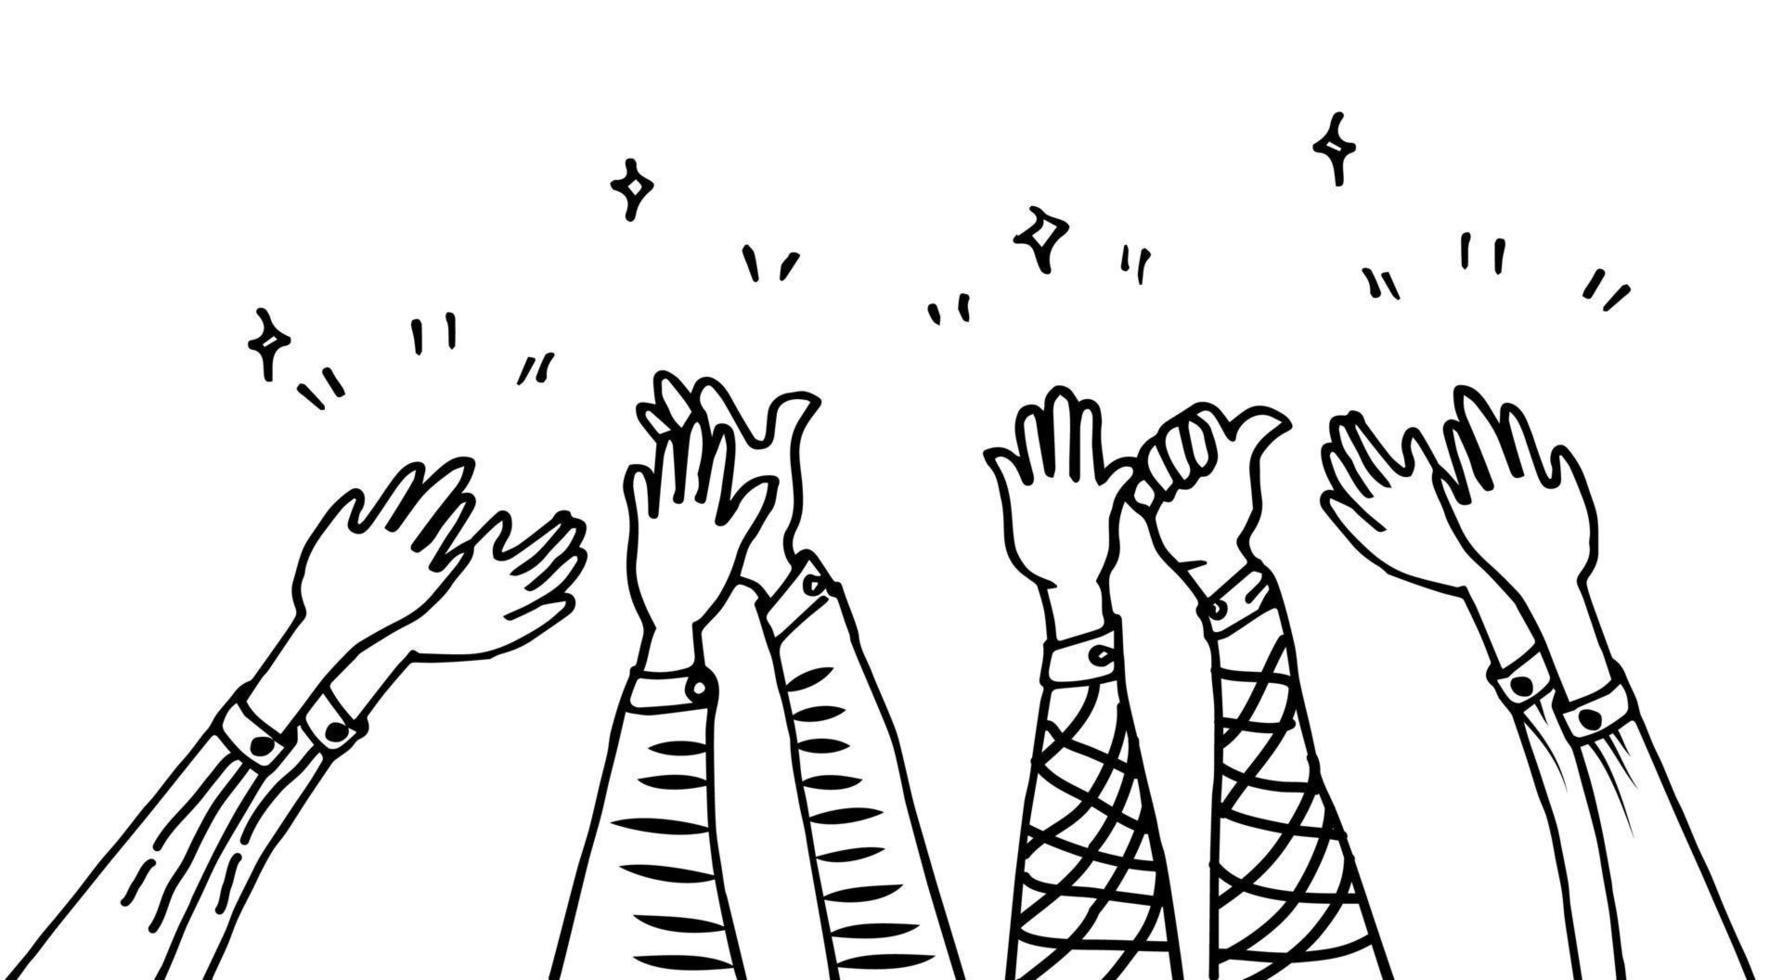 hand drawn of hands up, clapping ovation, applause, thumbs up gesture on doodle style. vector illustration